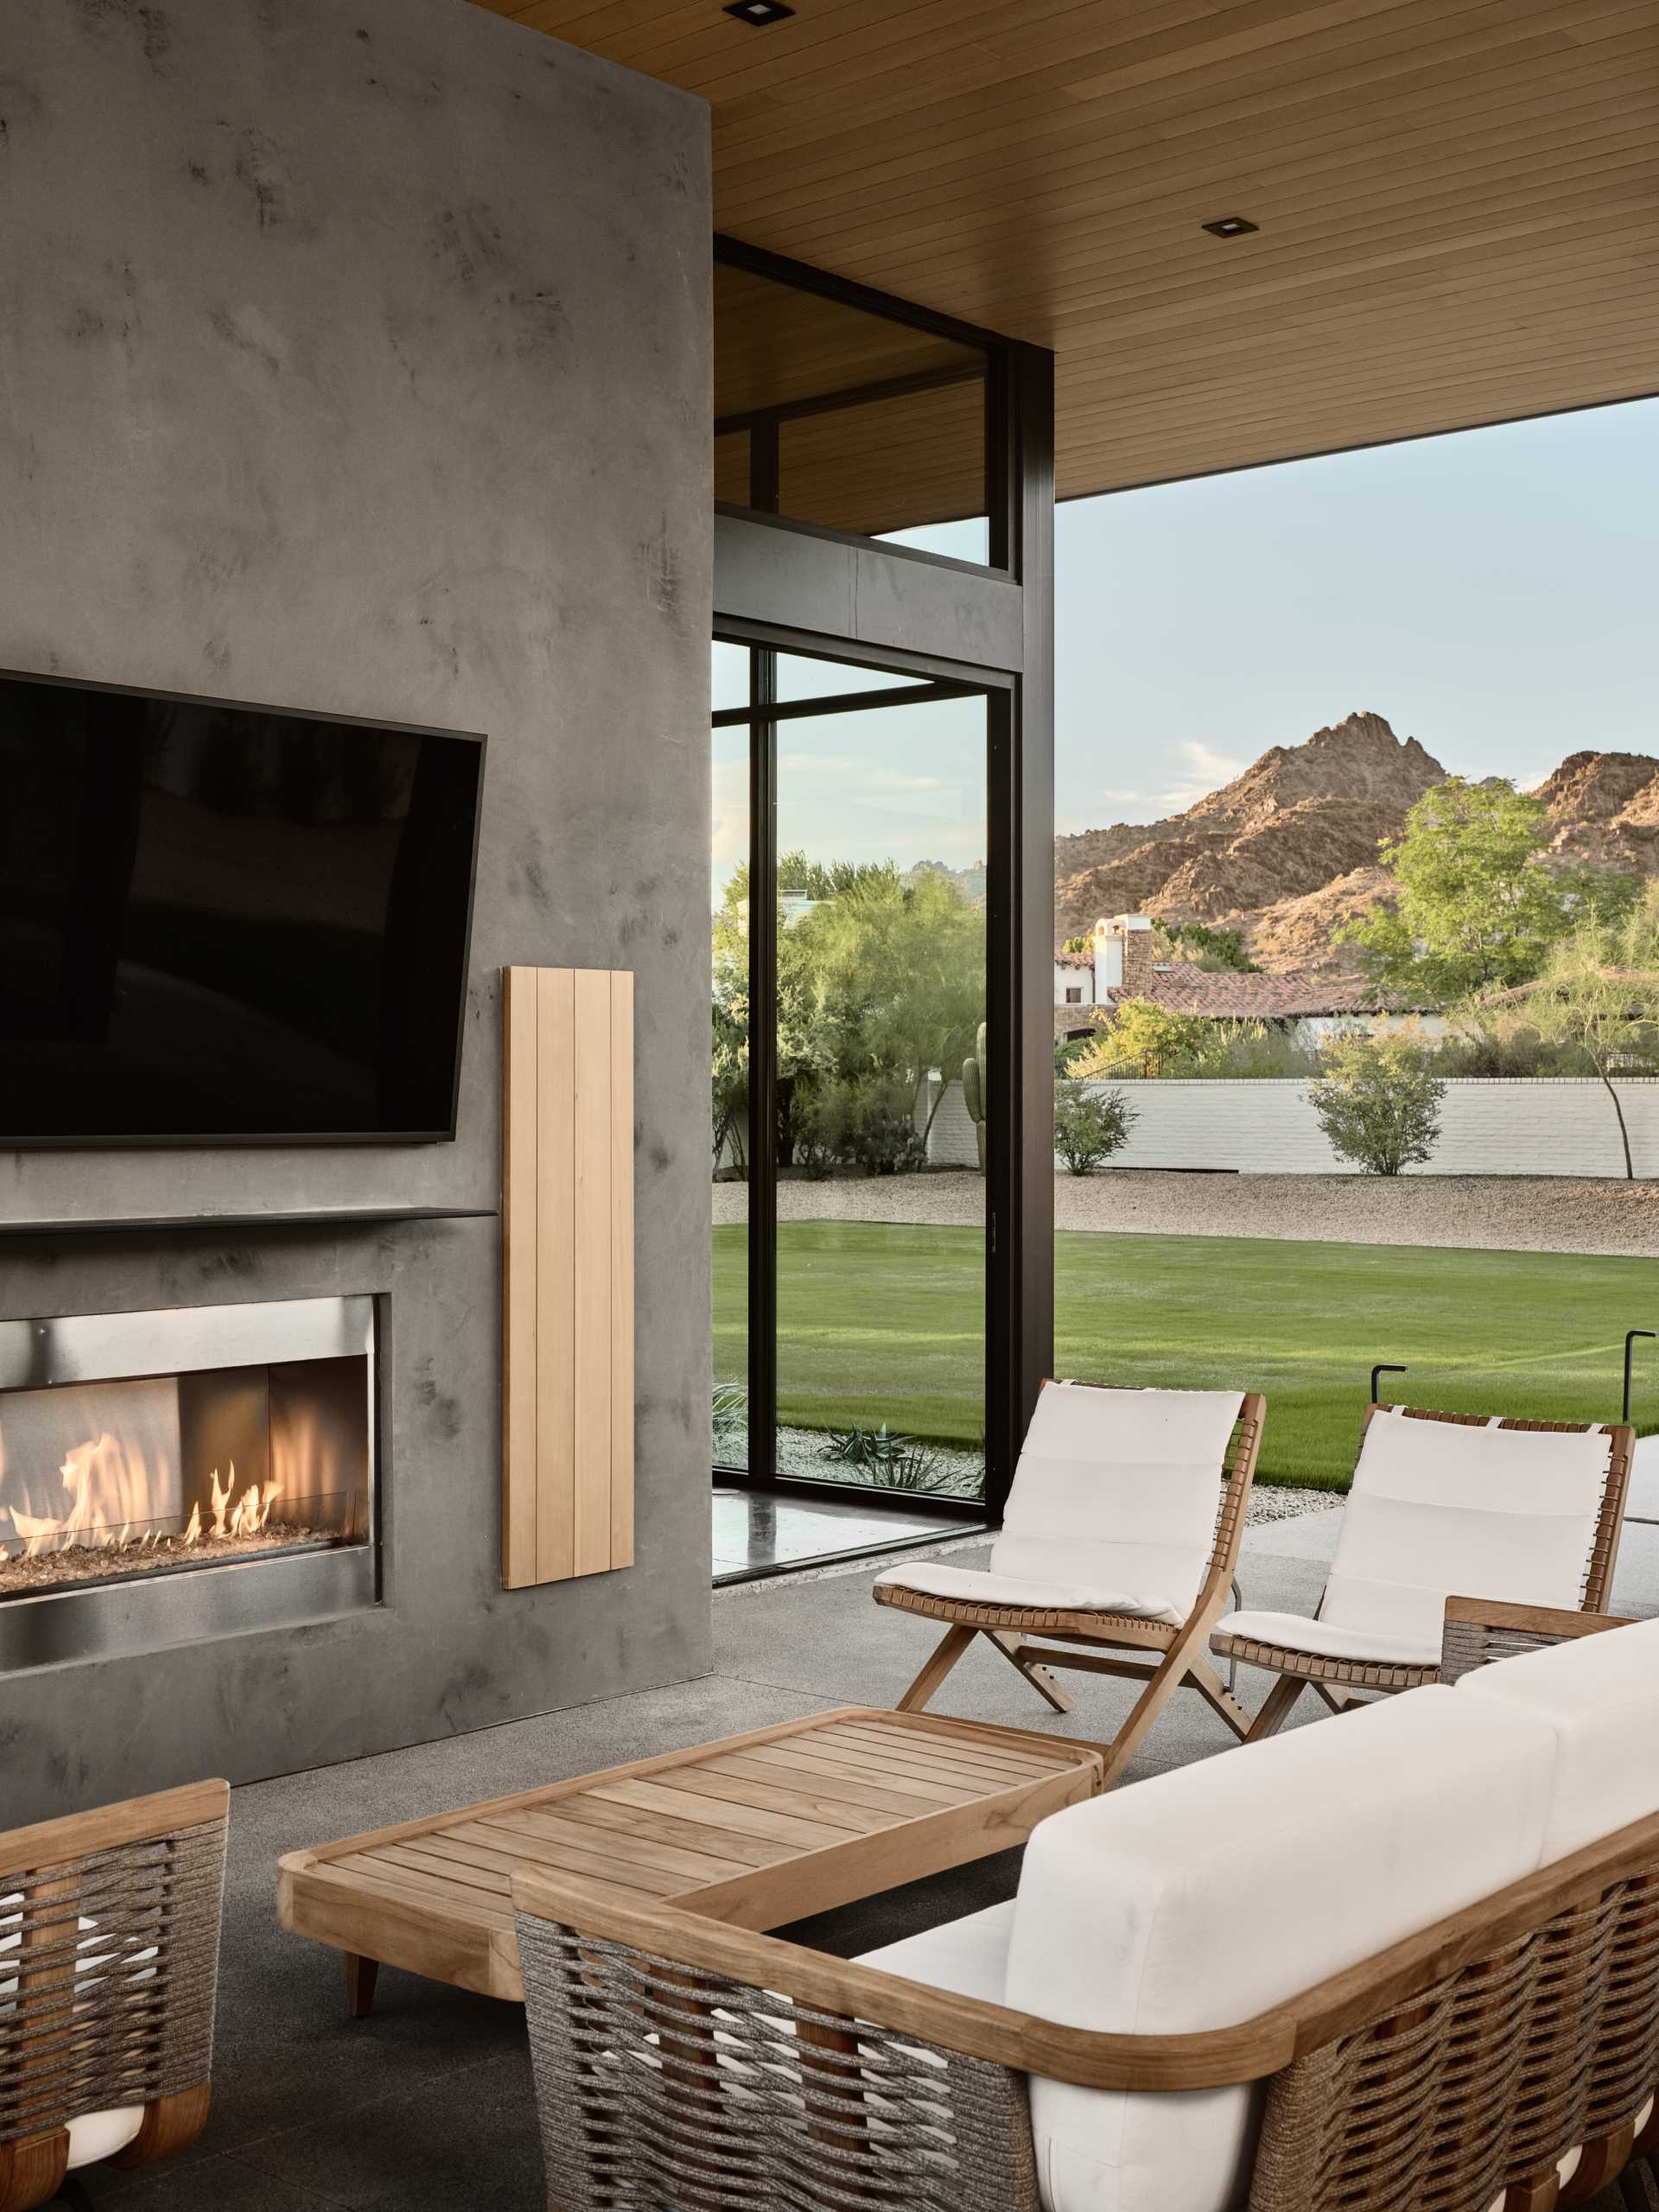 A modern house with a covered outdoor living room, fireplace, and bbq area.